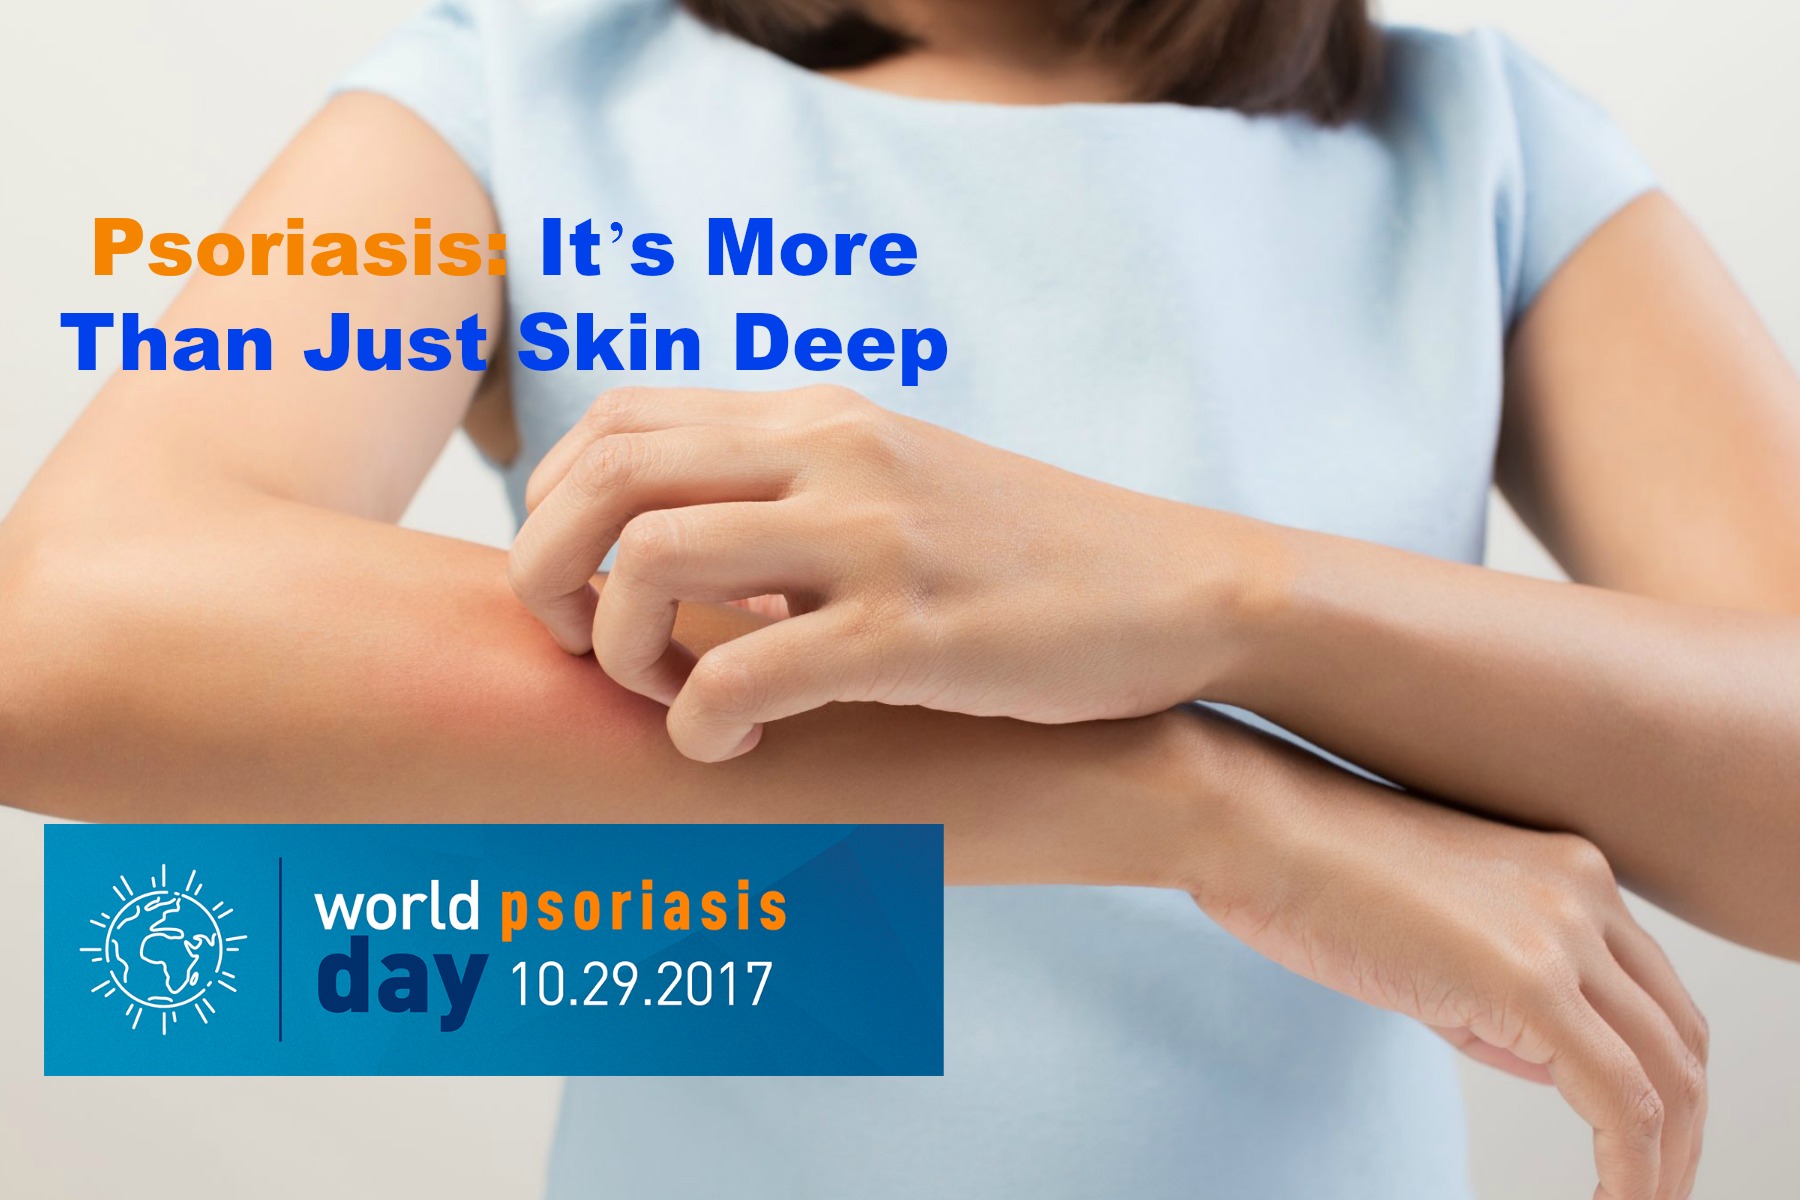 Psoriasis: It’s More Than Just Skin Deep